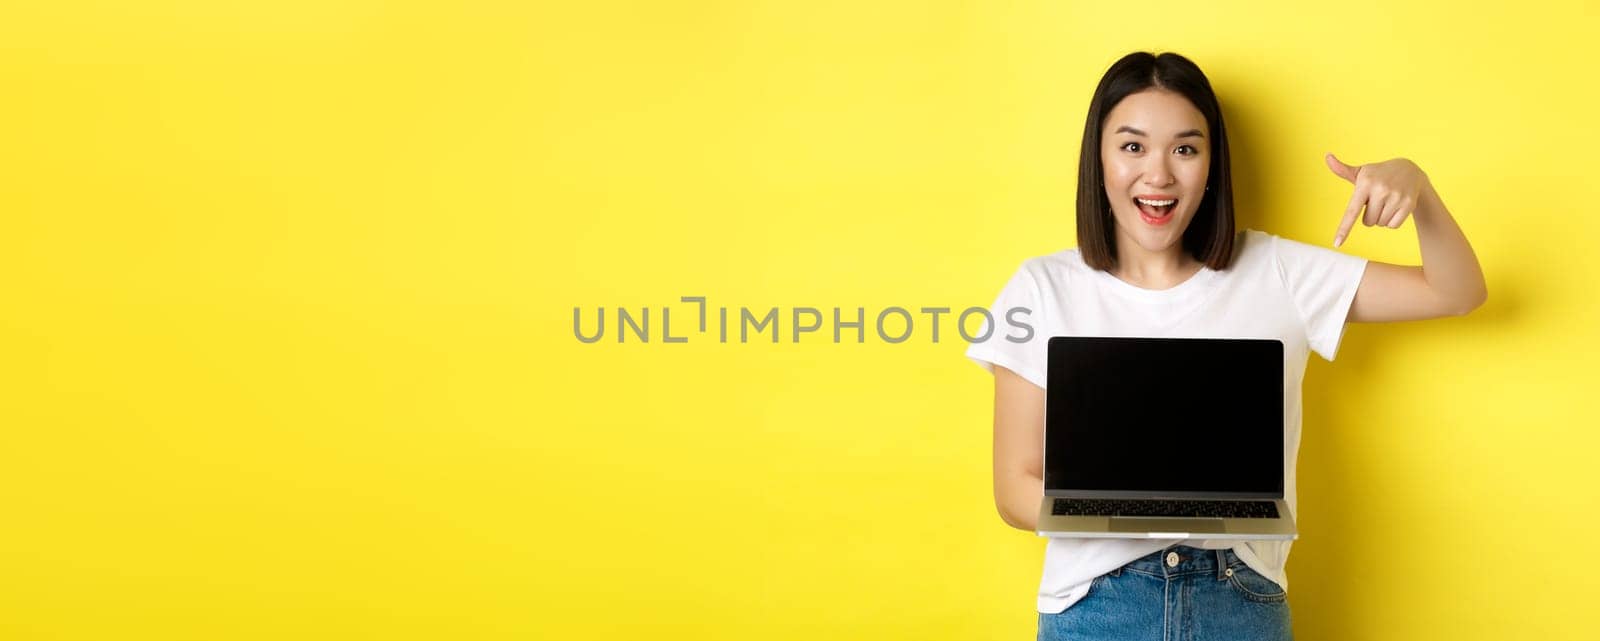 Young asian woman demonstrate online offer, showing laptop screen and smiling, standing over yellow background.